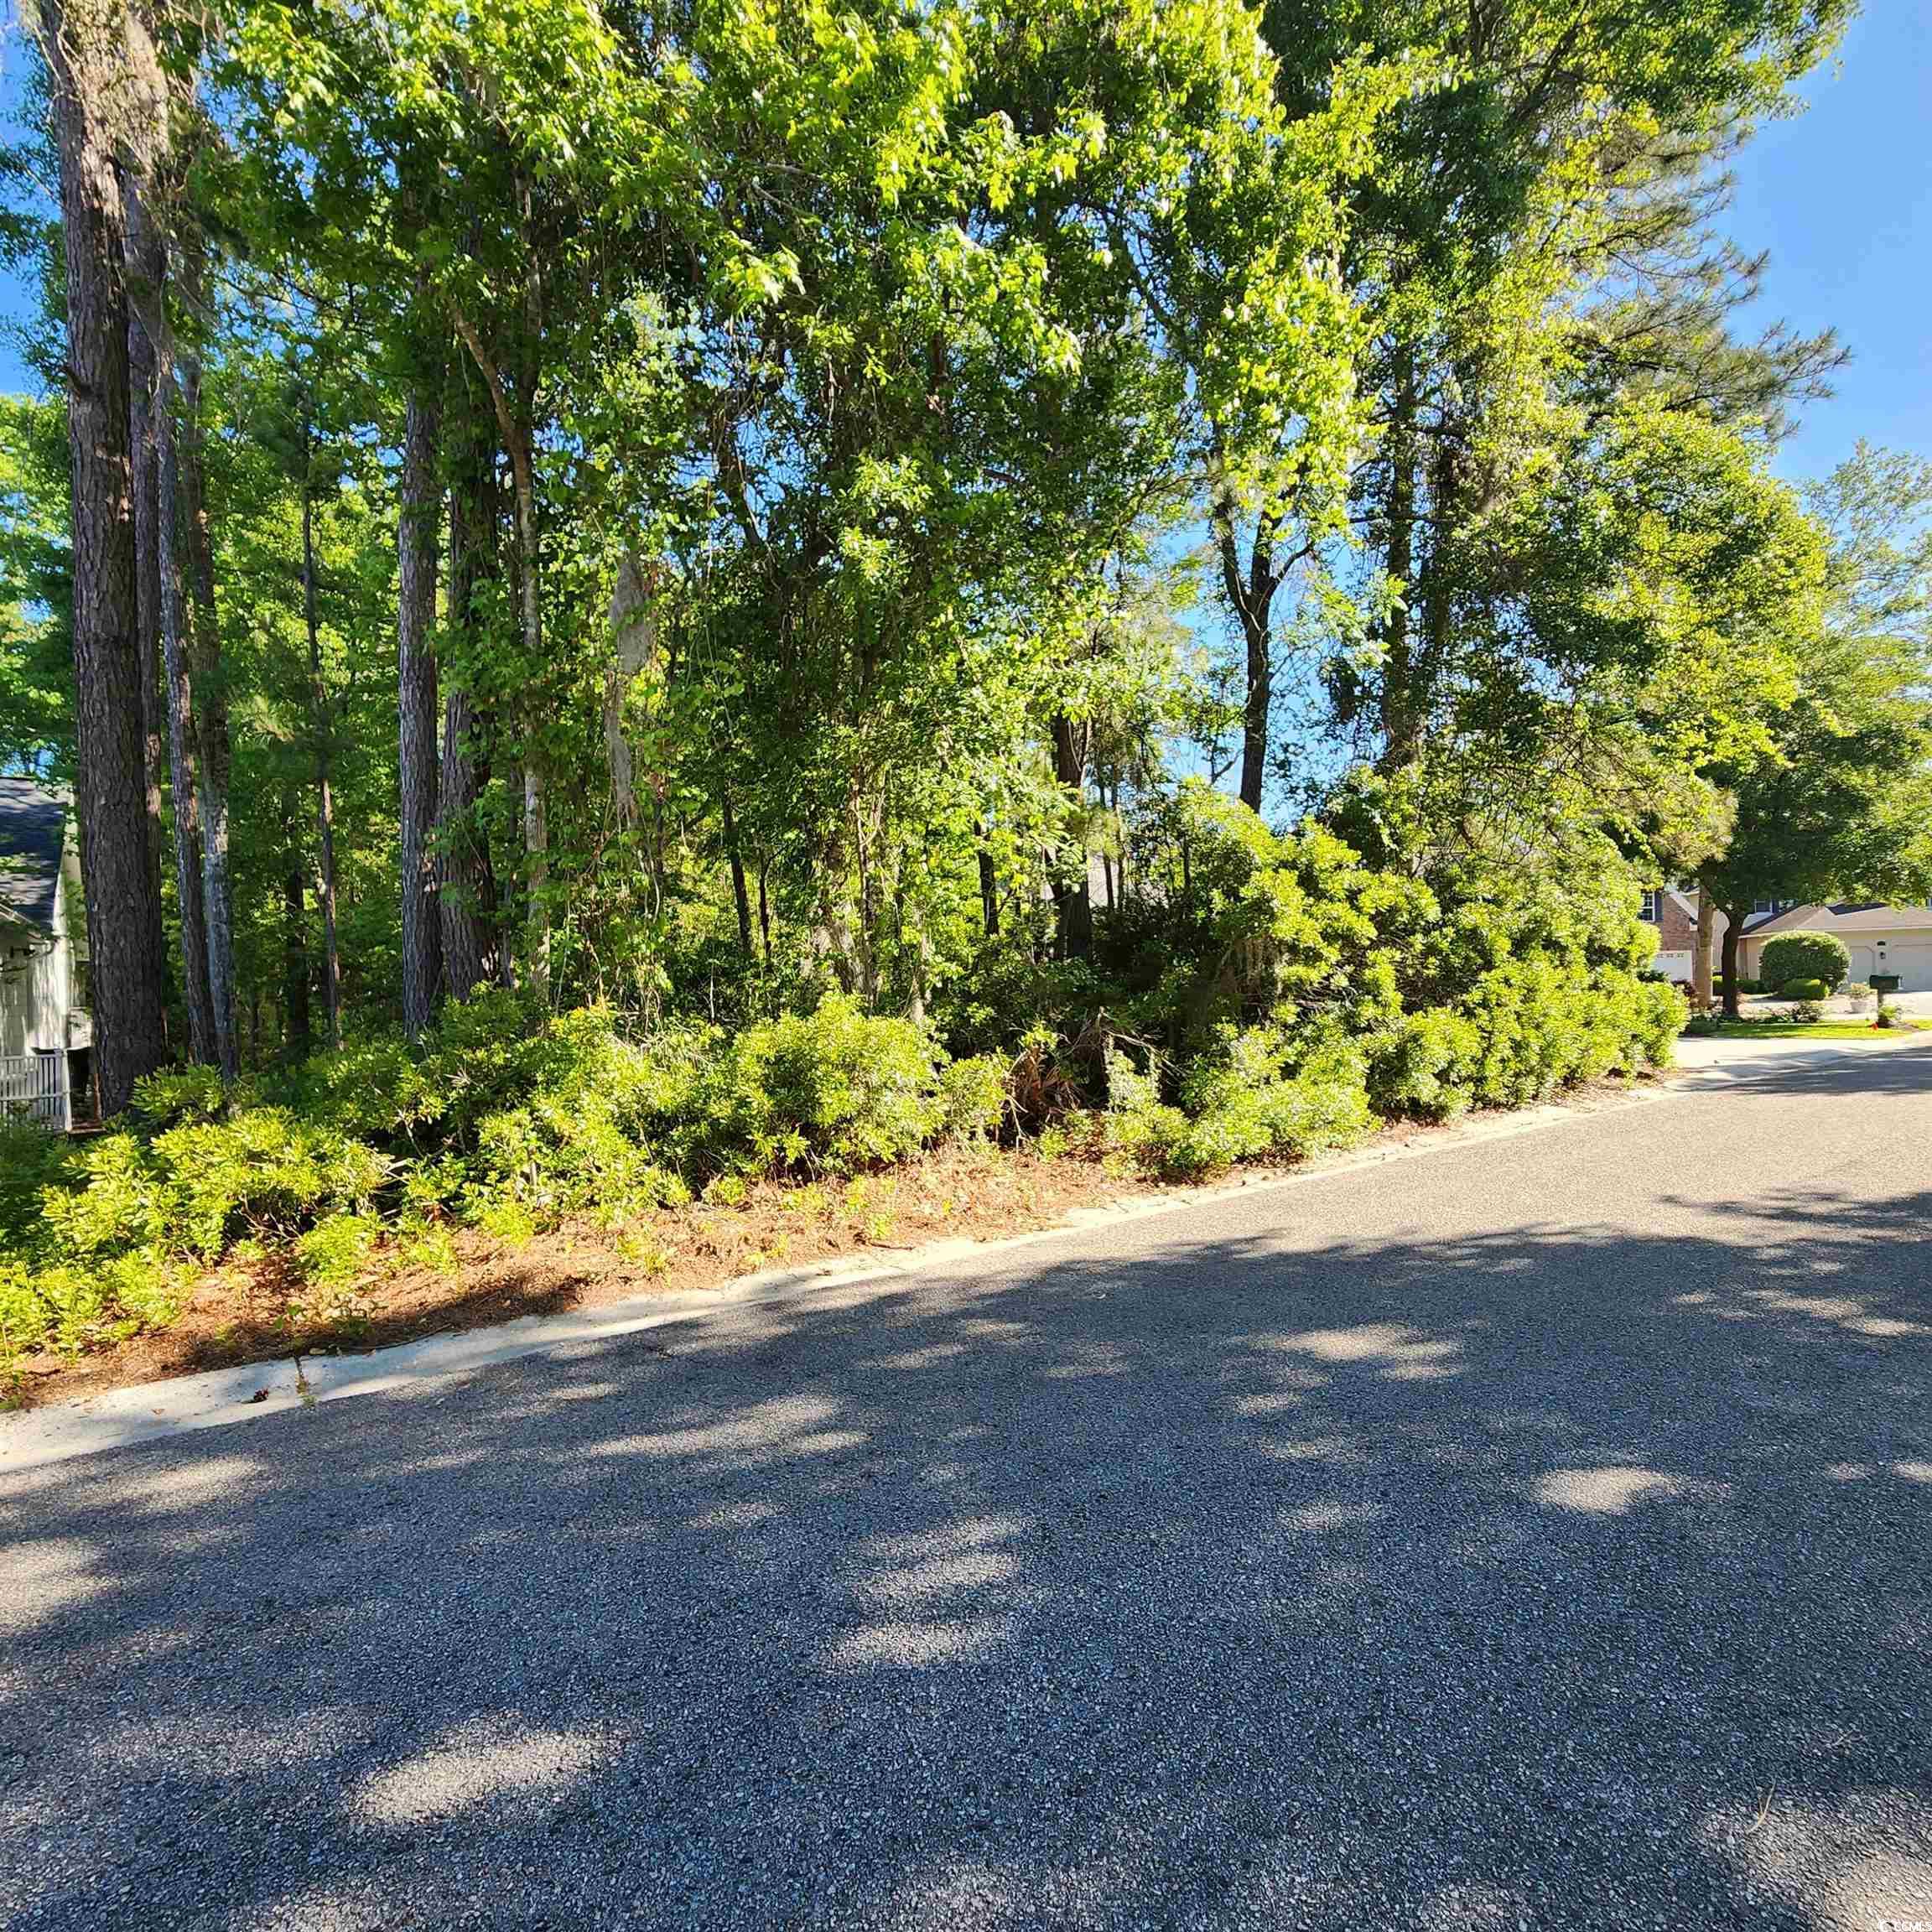 last lot available on pintail ct. quiet cul-de-sac bordered by natural area.  pawleys plantation is a beautiful gated community located on pawleys creek across from the south end of pawleys island.